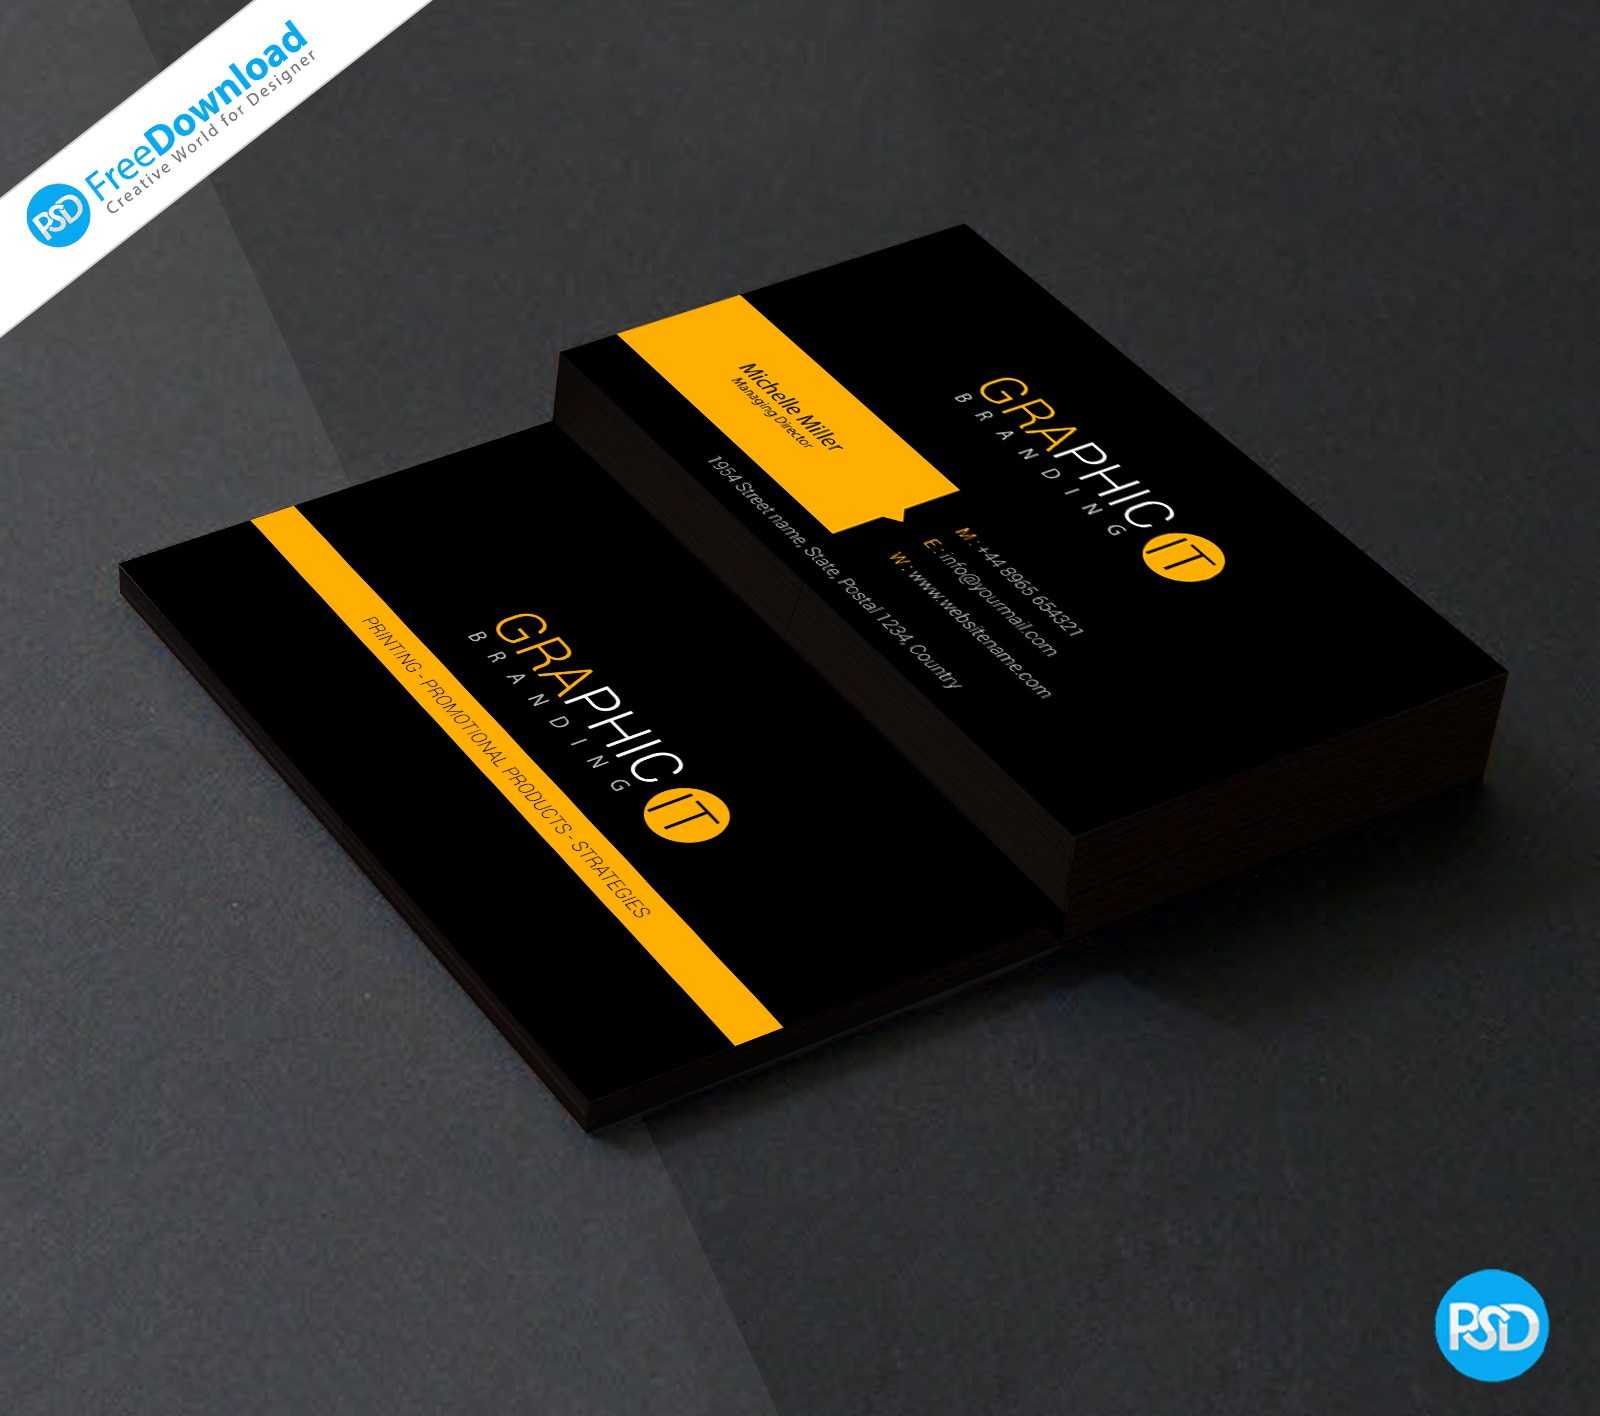 023 Professional Business Card Design Psd Blank Template Pertaining To Professional Business Card Templates Free Download